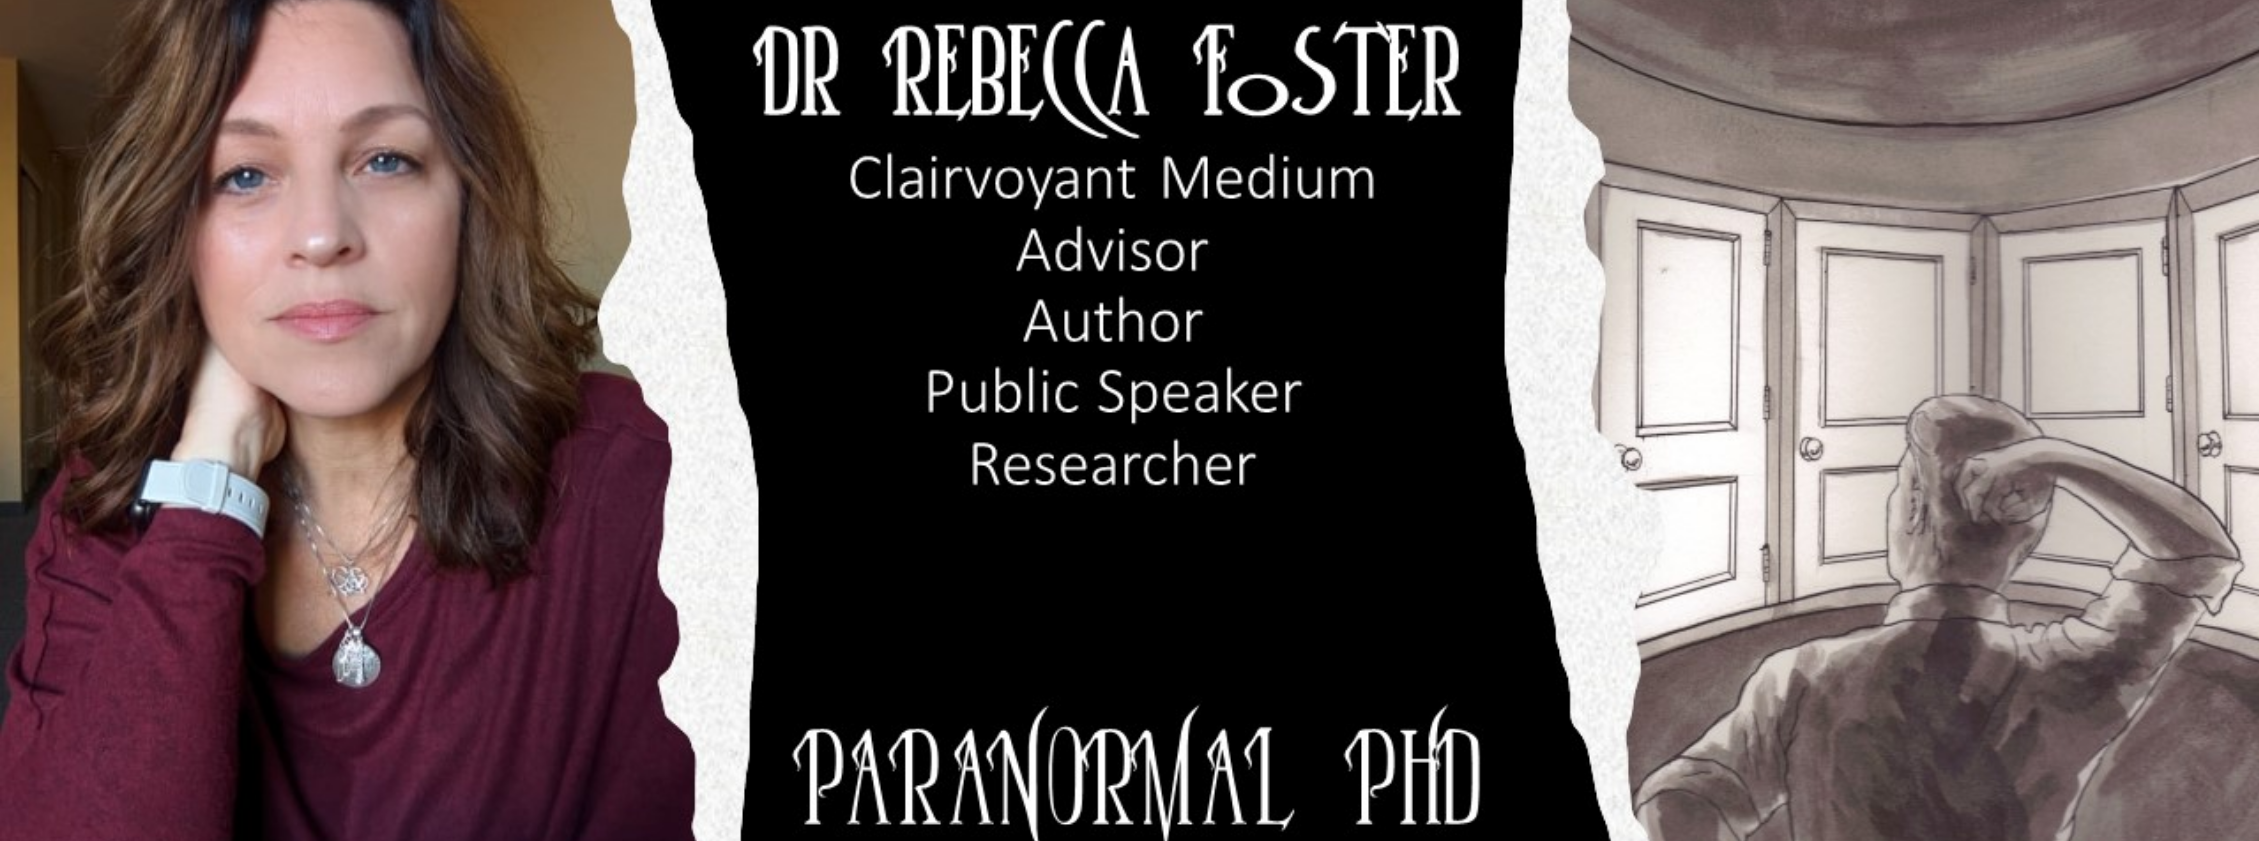 Paranormal PhD with Dr. Rebecca Foster